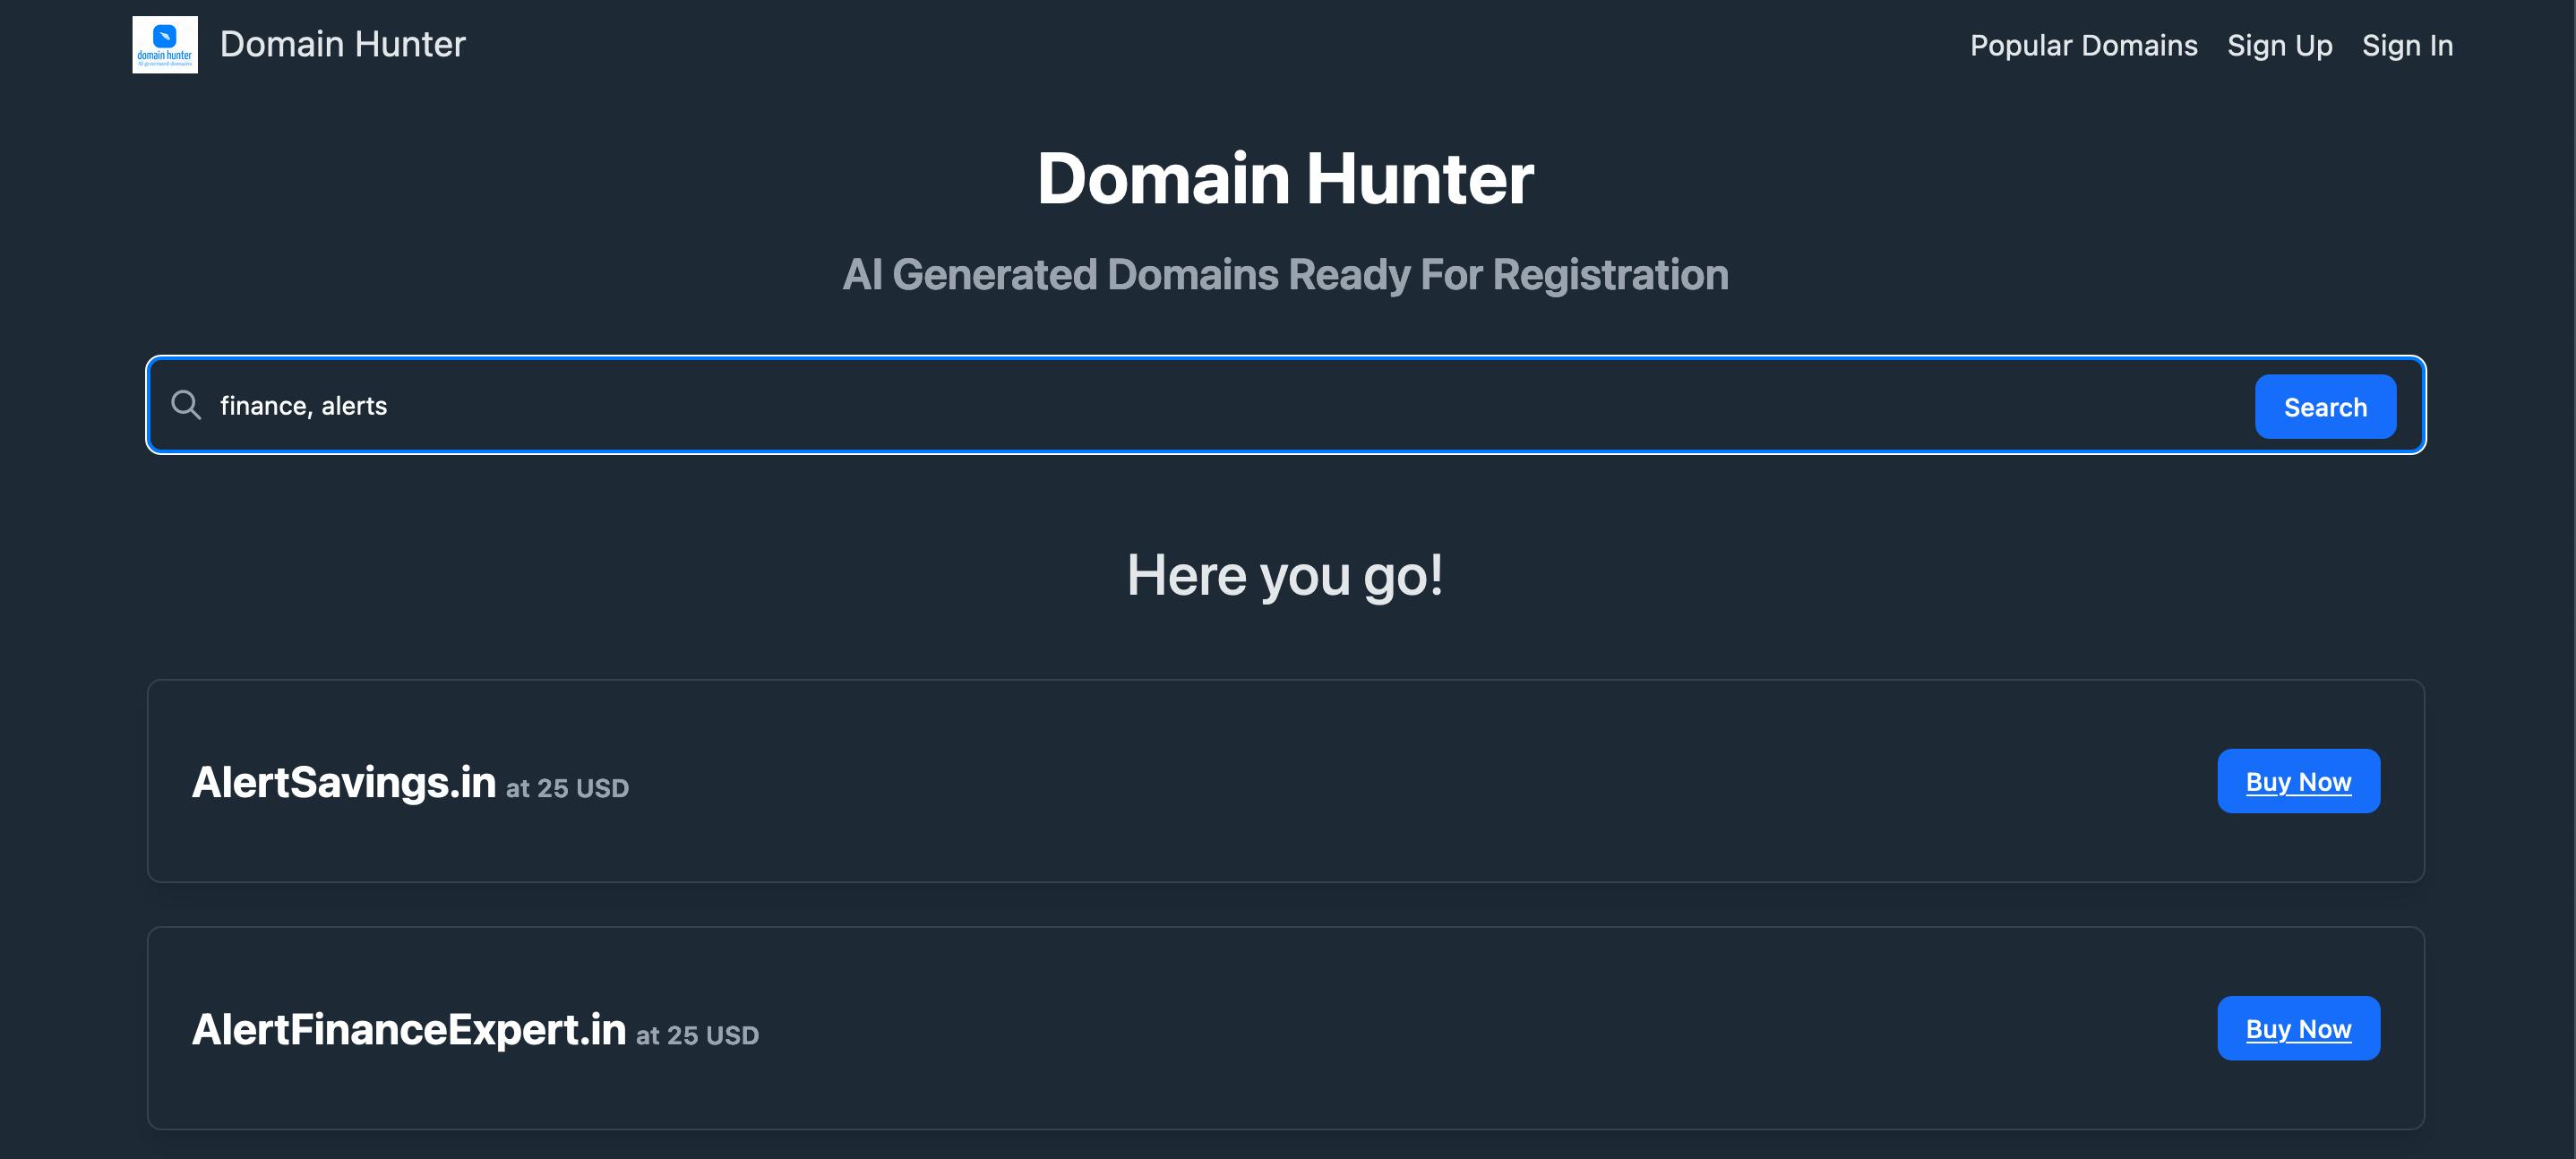 An image showing domain hunter homepage